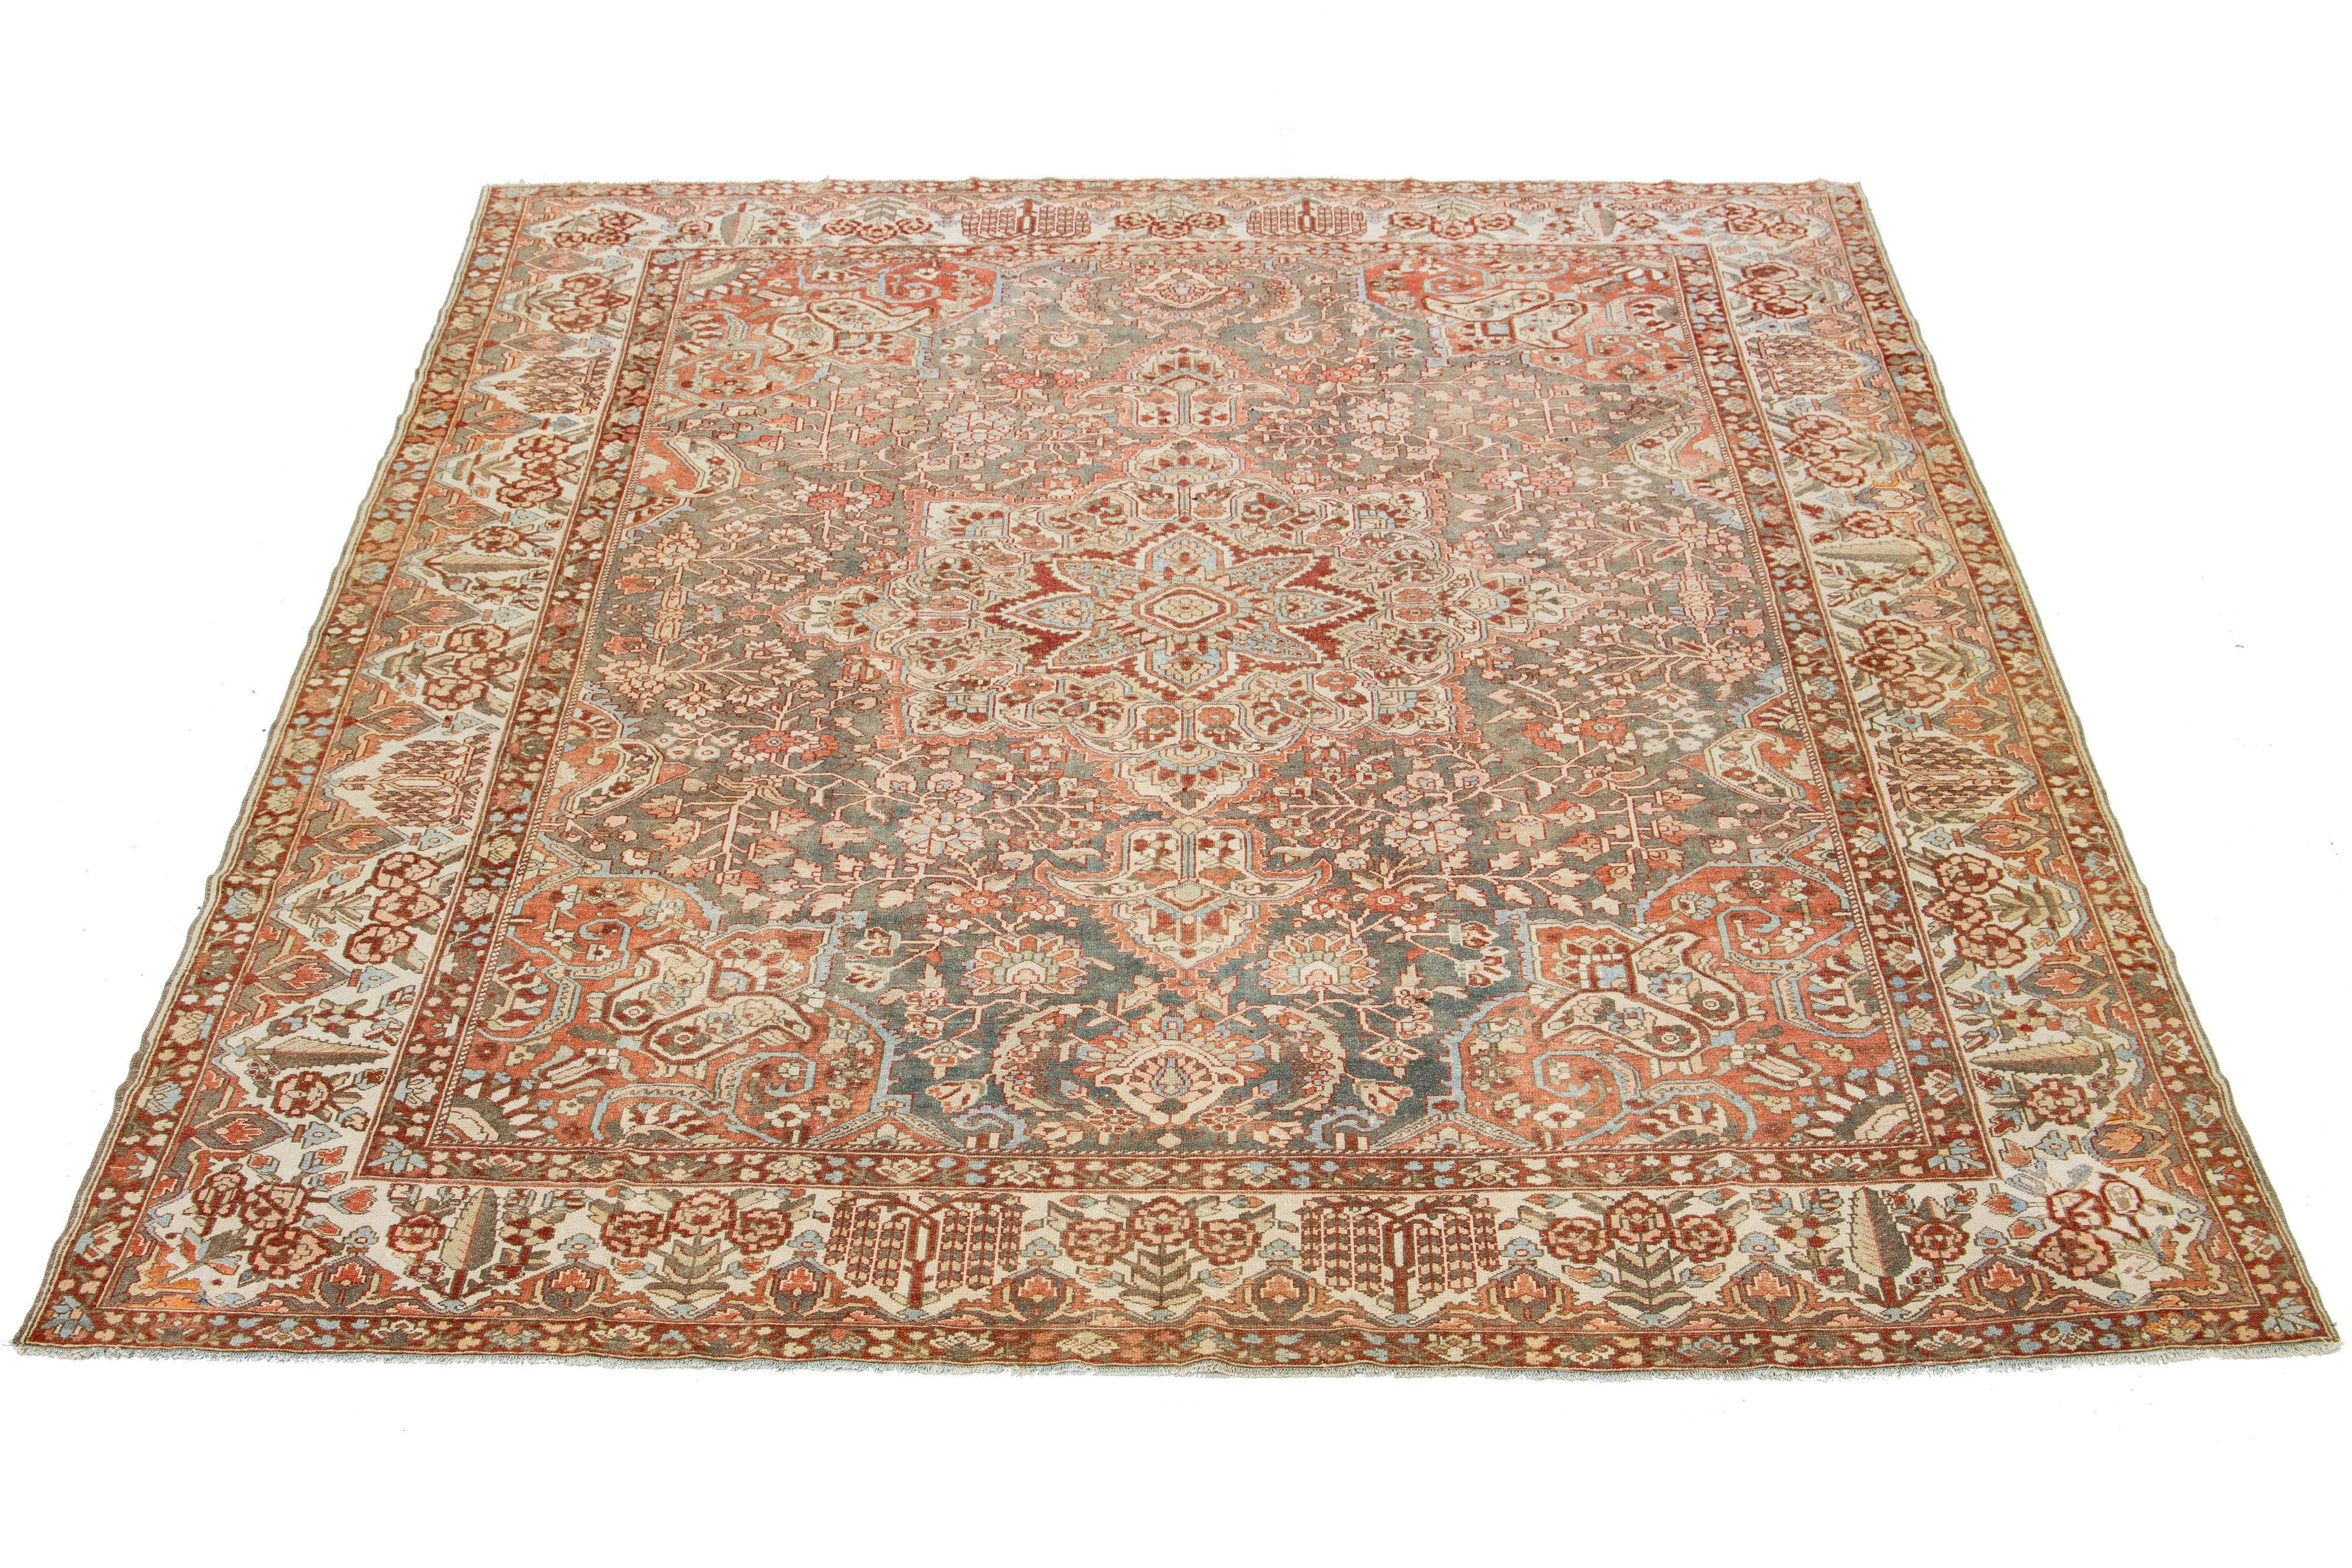 Beautiful Antique Bakhtiari hand-knotted wool rug with a gray color field. This Persian piece has a blue, beige,  red-rust, and peach in a classic medallion floral design.

This rug measures 12'3